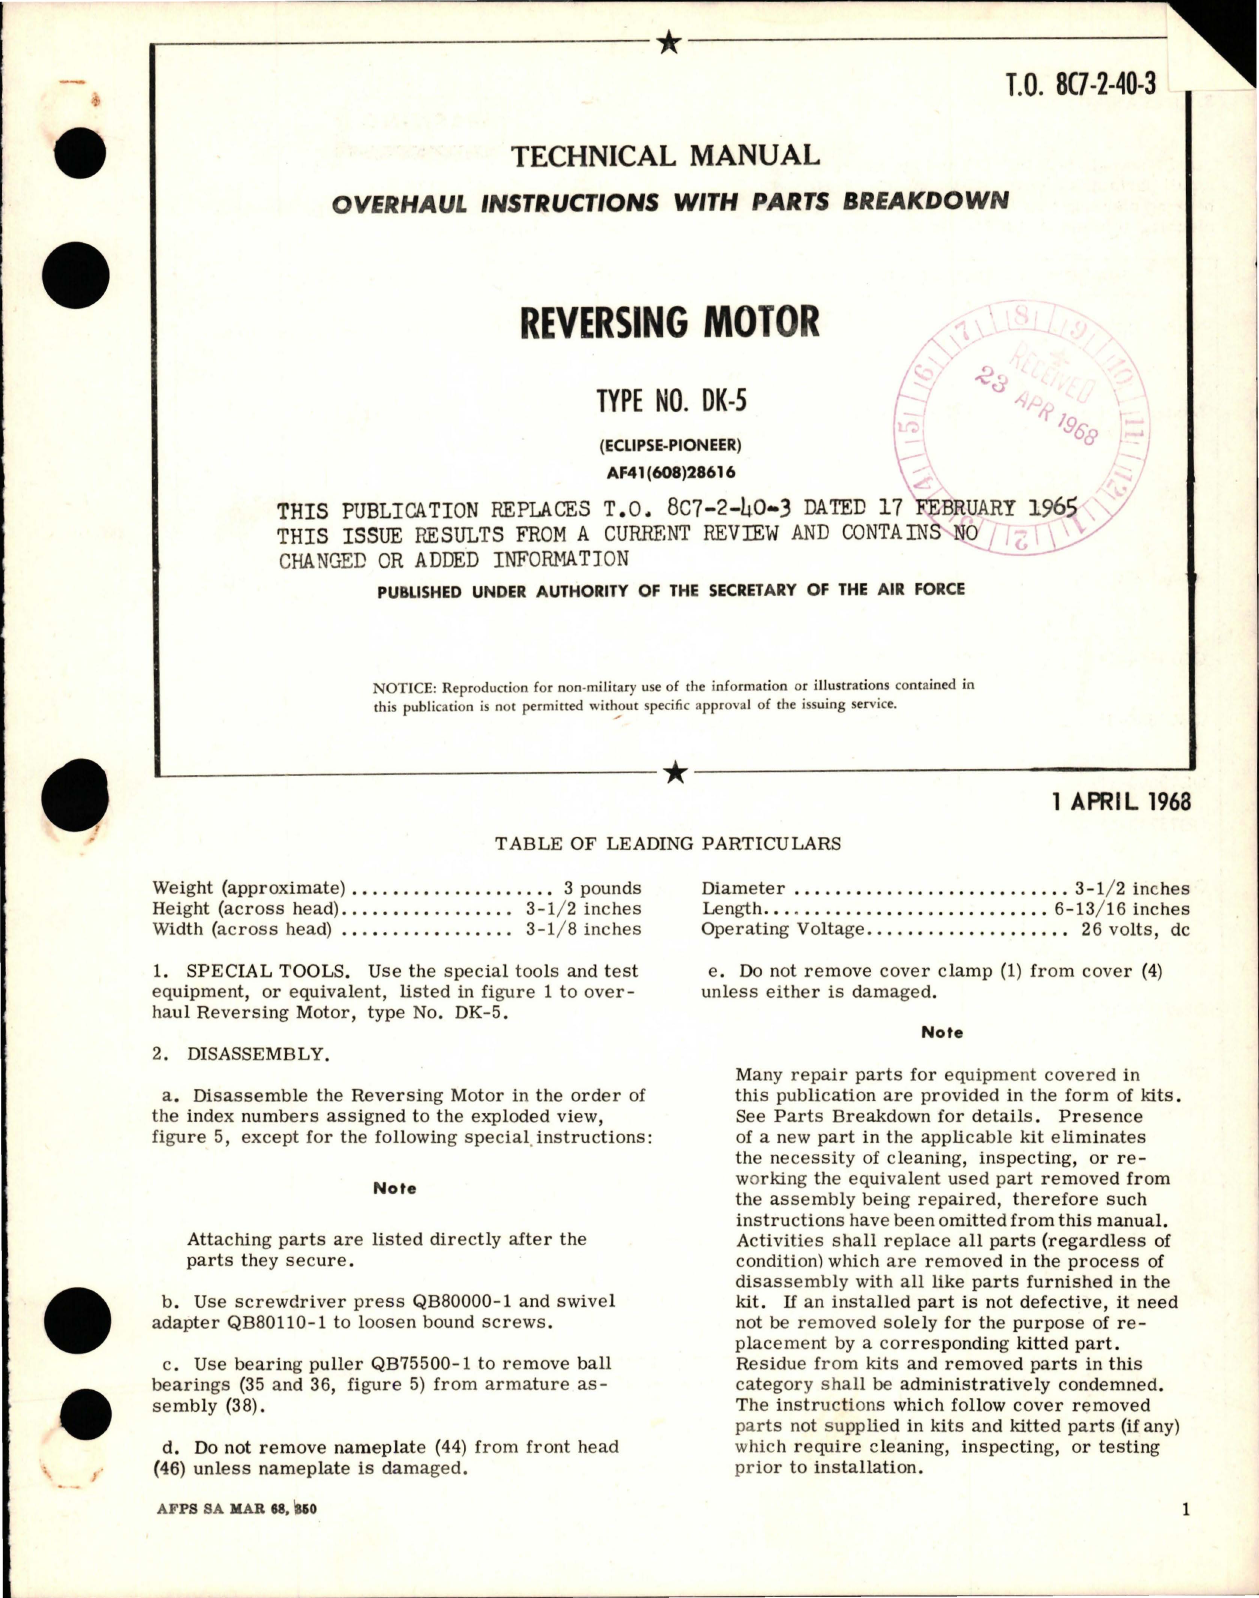 Sample page 1 from AirCorps Library document: Overhaul Instructions with Parts Breakdown for Reversing Motor - Type DK-5 